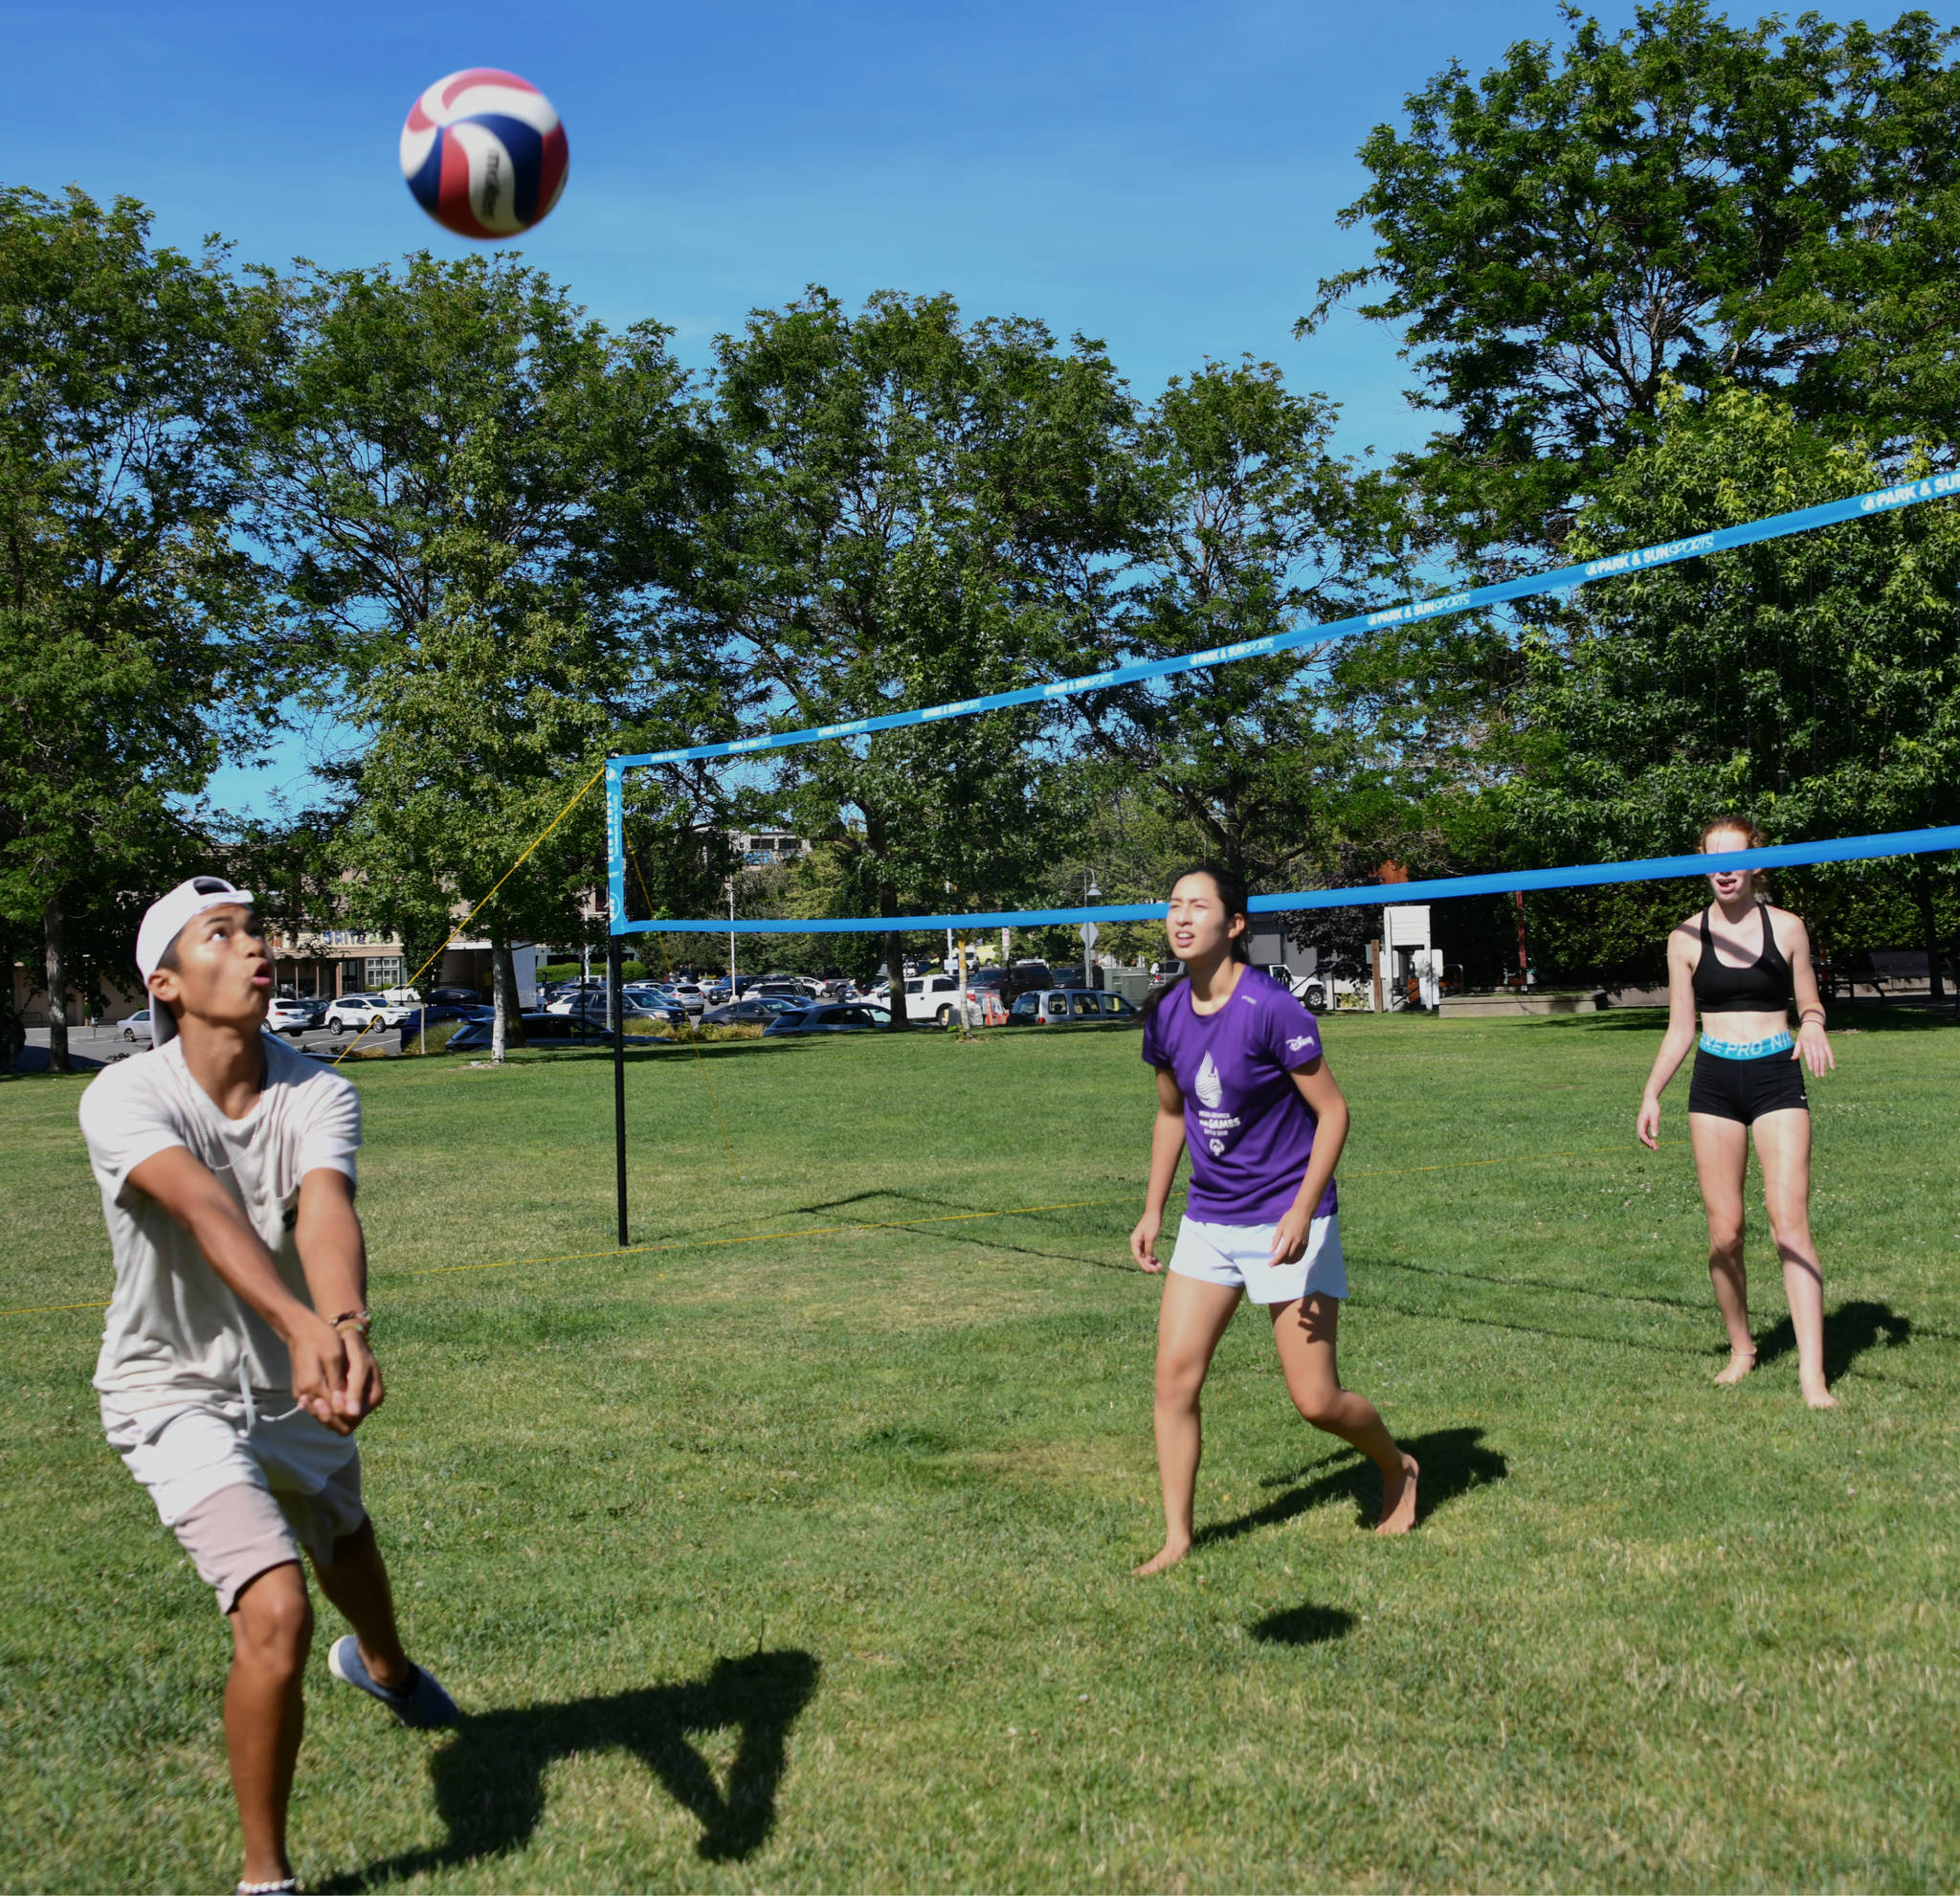 Giovee Roque, left, eyes the volleyball during an afternoon match with friends Megan Sandoval, center, and Mia Vorkoper on Aug. 10 at Mercerdale Park. Annabelle Hopkins, not pictured, was also part of the group. Andy Nystrom/ staff photo